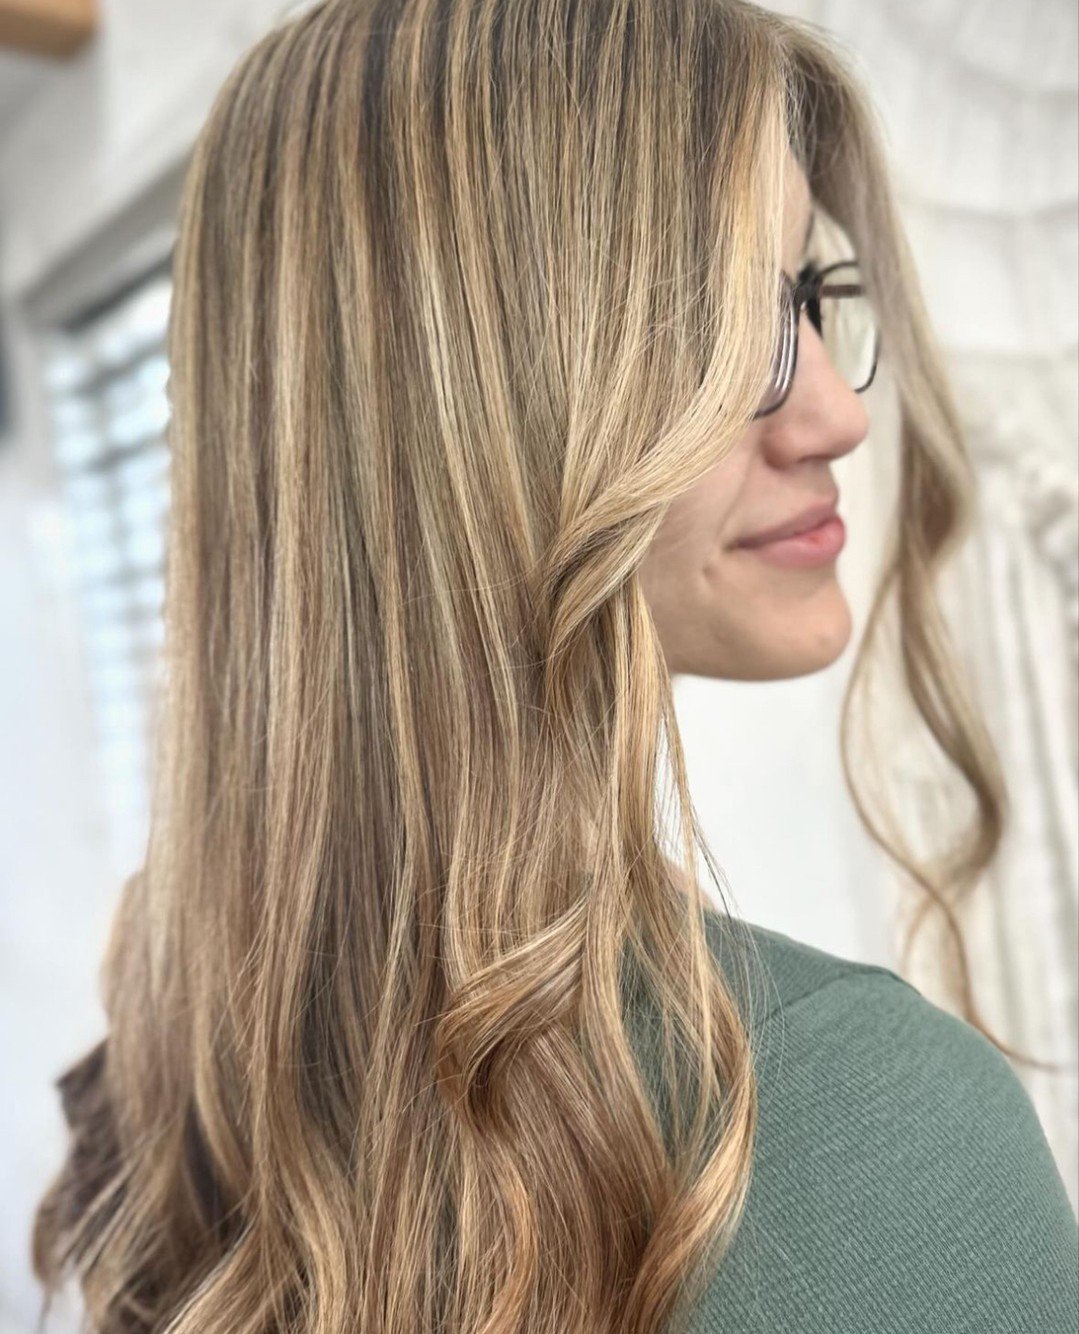 To us, &quot;spring cleaning&quot; means adding highlights to your hair! 😉

@styledbymercedes.ct added the perfect pop of brightness for our client, everyone is spring ready!

To book your color appointment with us, visit the link in bio.